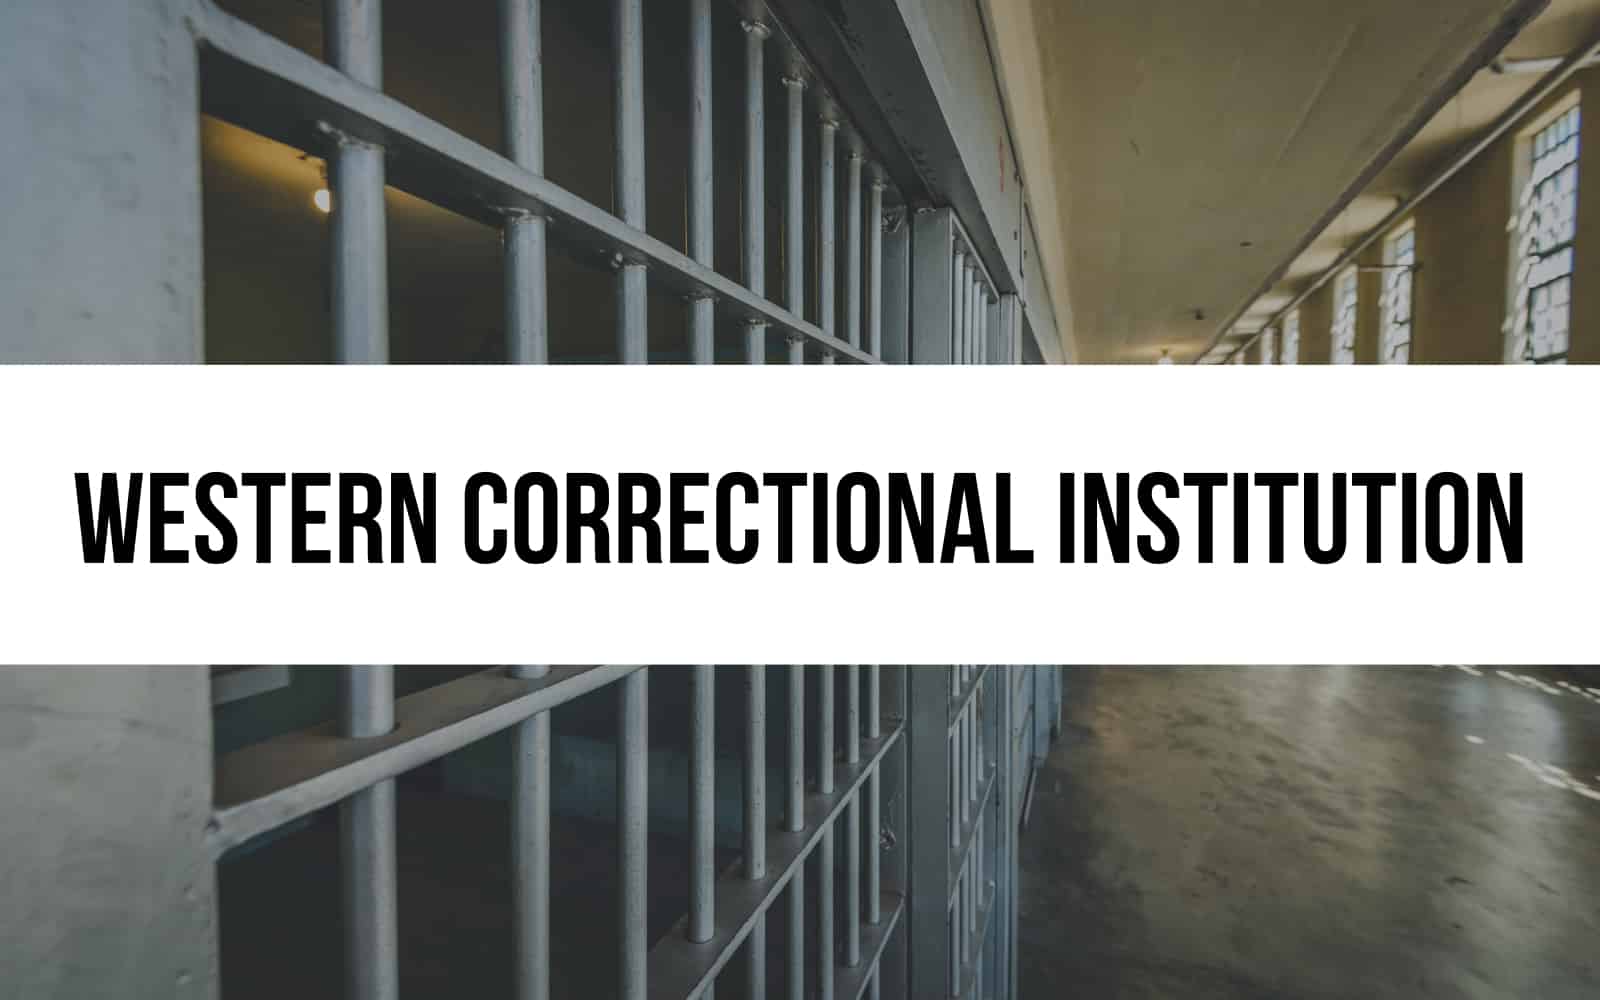 Western Correctional Institution